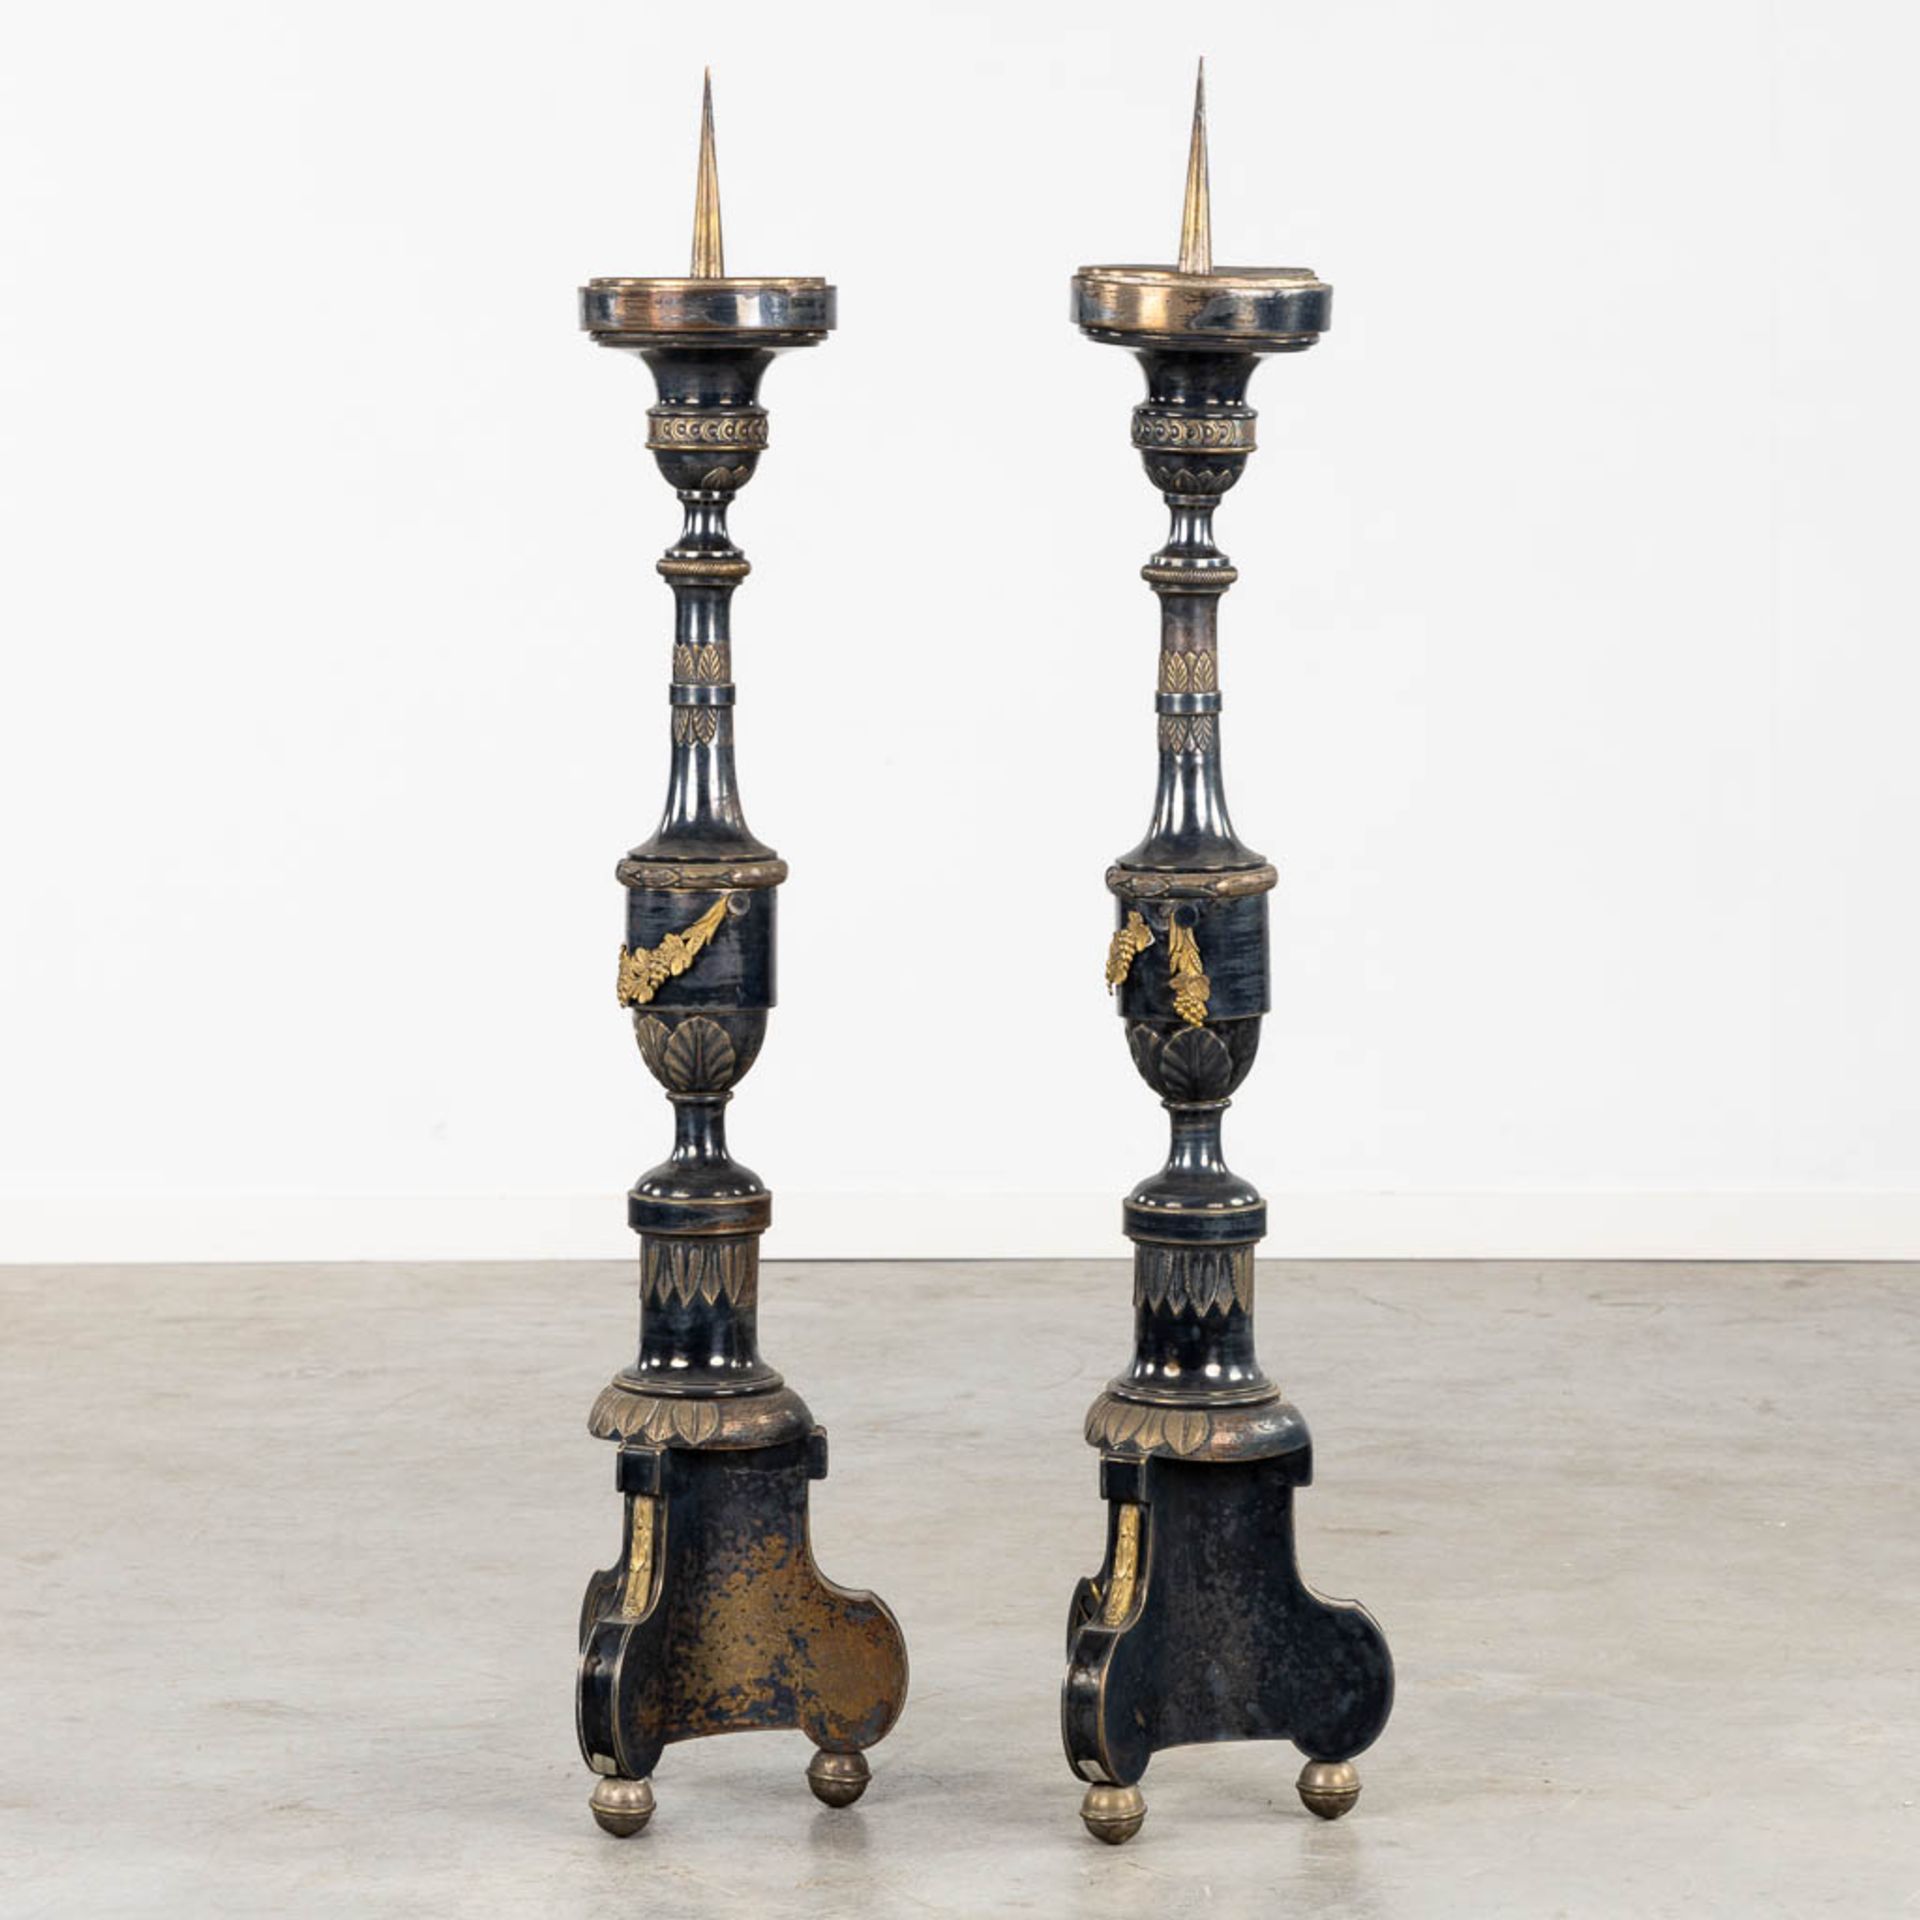 A pair of Church Candlesticks, silver- and gold-plated metal. 19th C. (H:120 cm) - Bild 5 aus 9